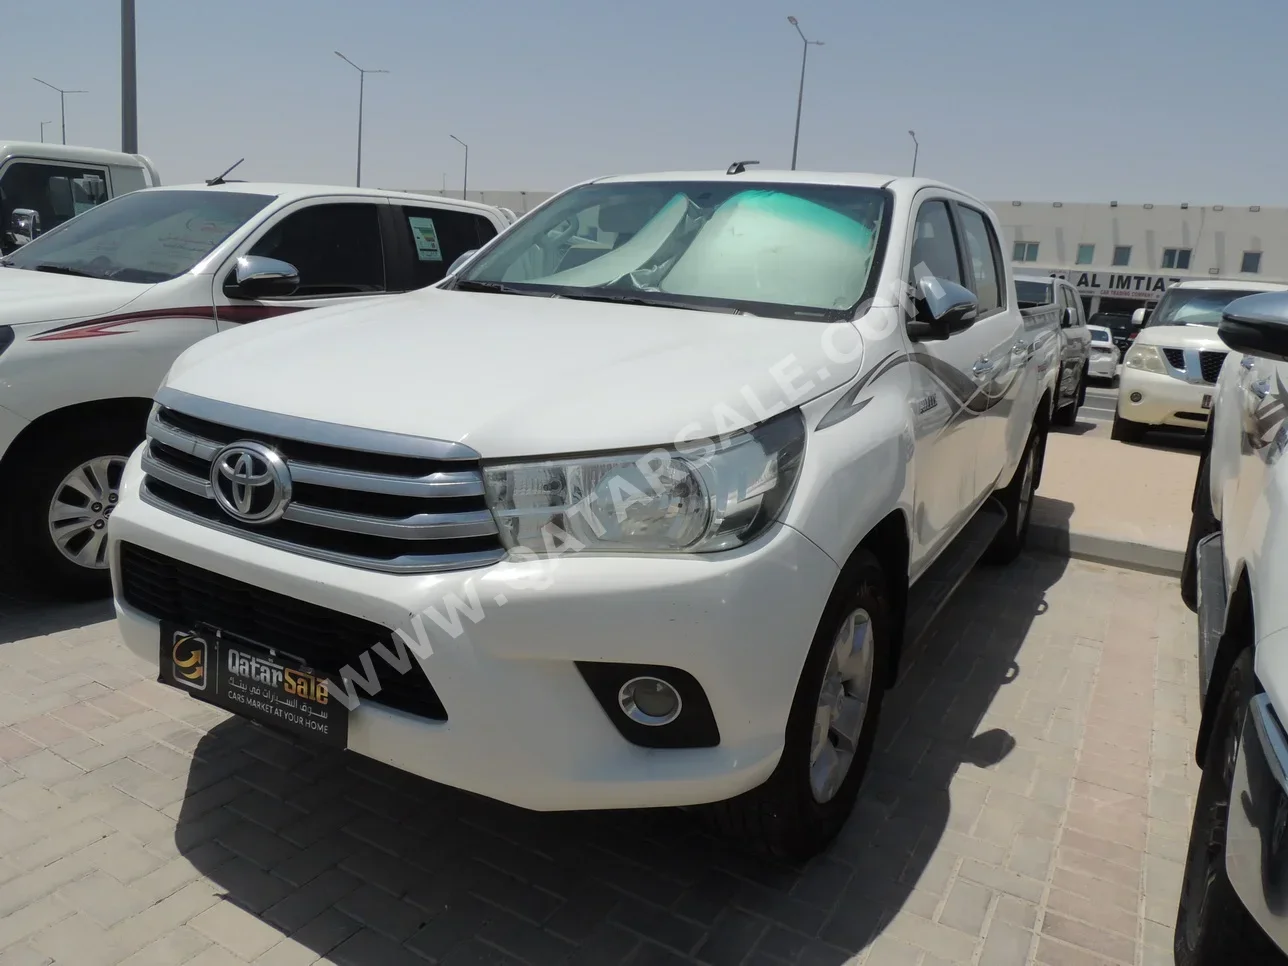 Toyota  Hilux  SR5  2017  Automatic  283,000 Km  4 Cylinder  Four Wheel Drive (4WD)  Pick Up  White